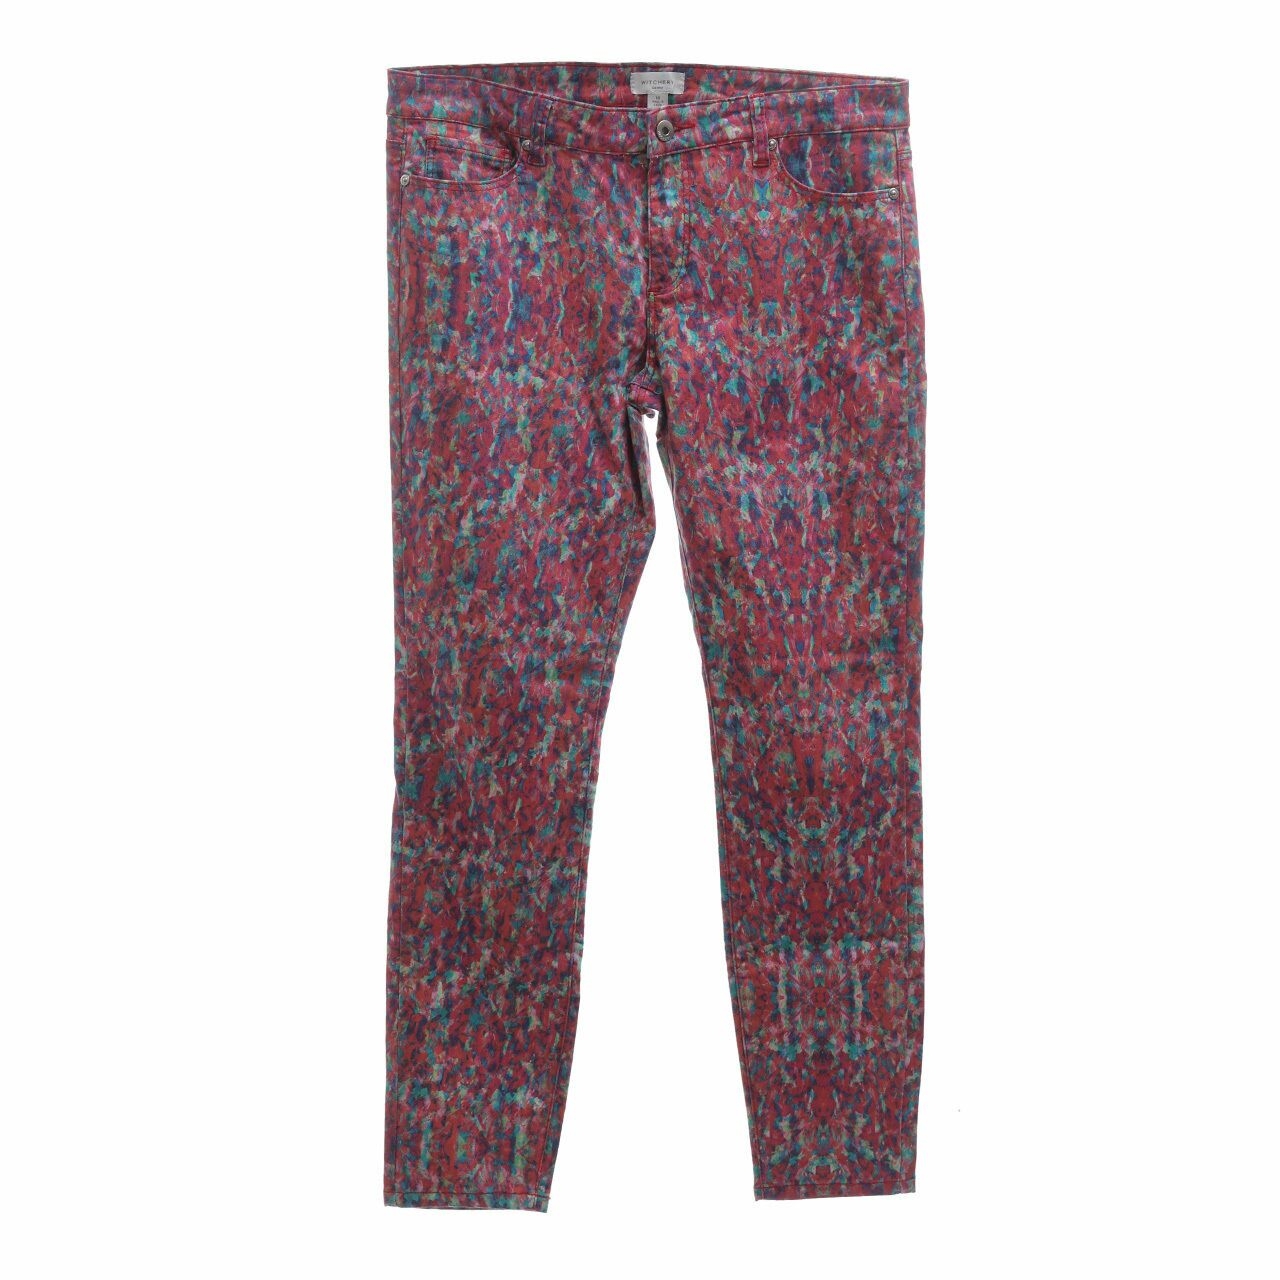 Witchery Pink Printed Long Pants